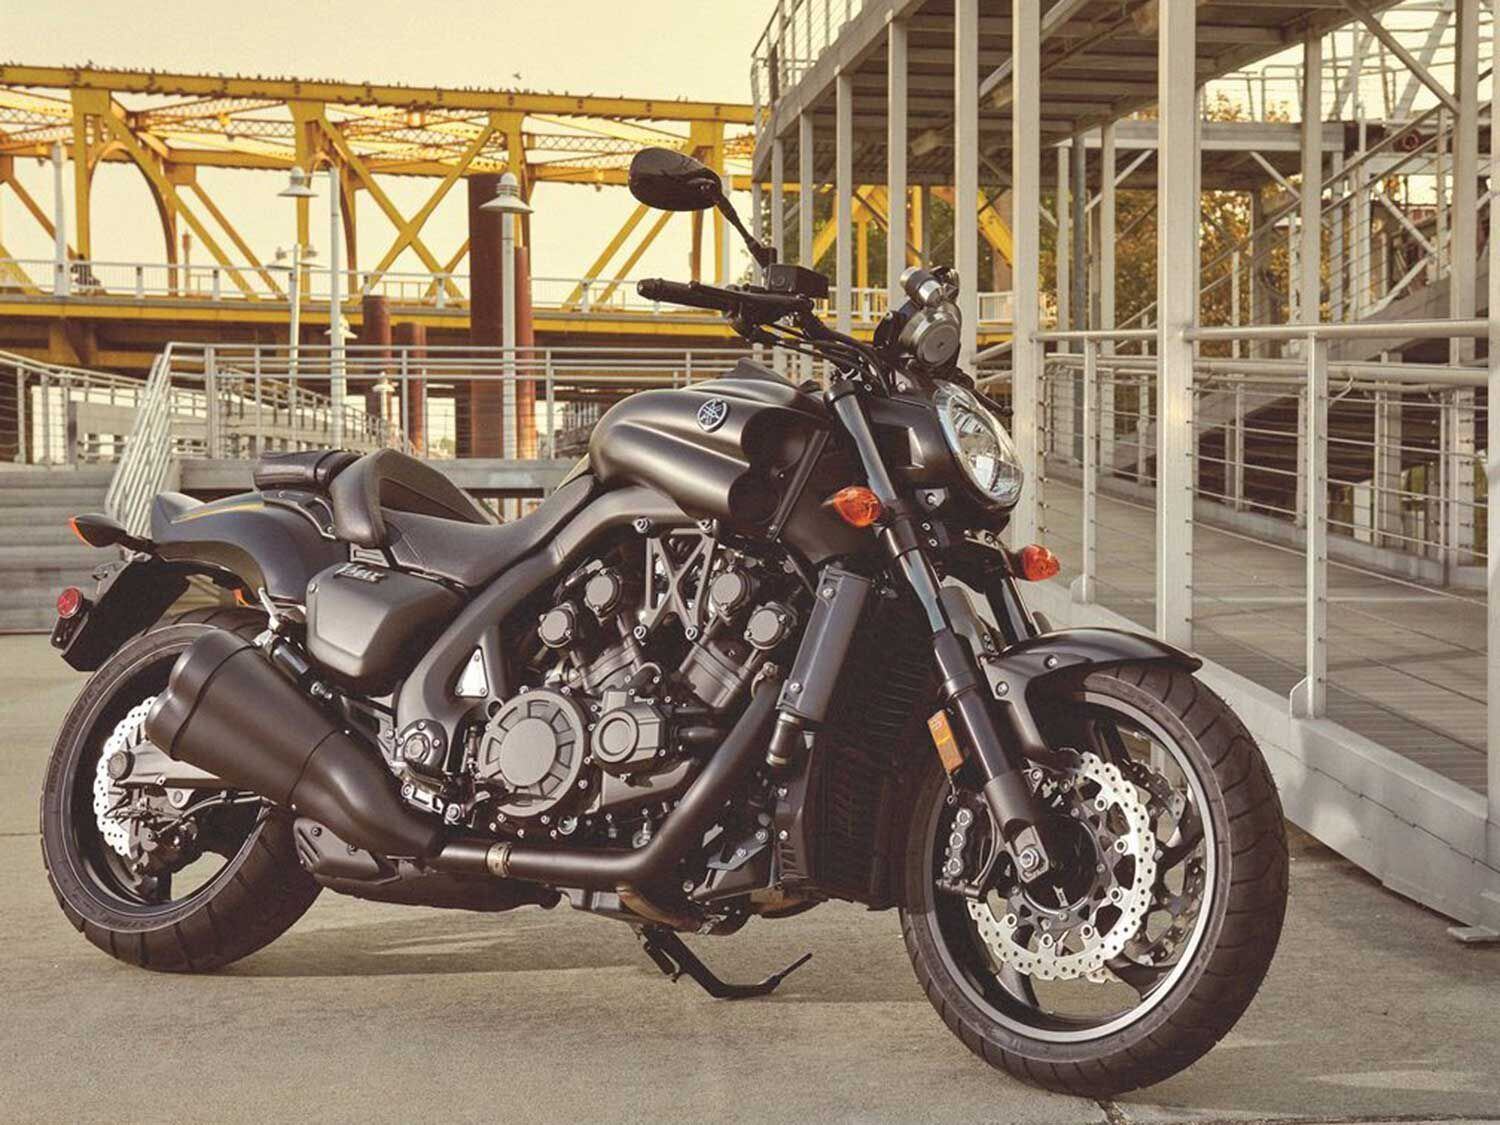 Yamaha’s venerable, feisty VMax has been making waves around the world for nearly 40 years.